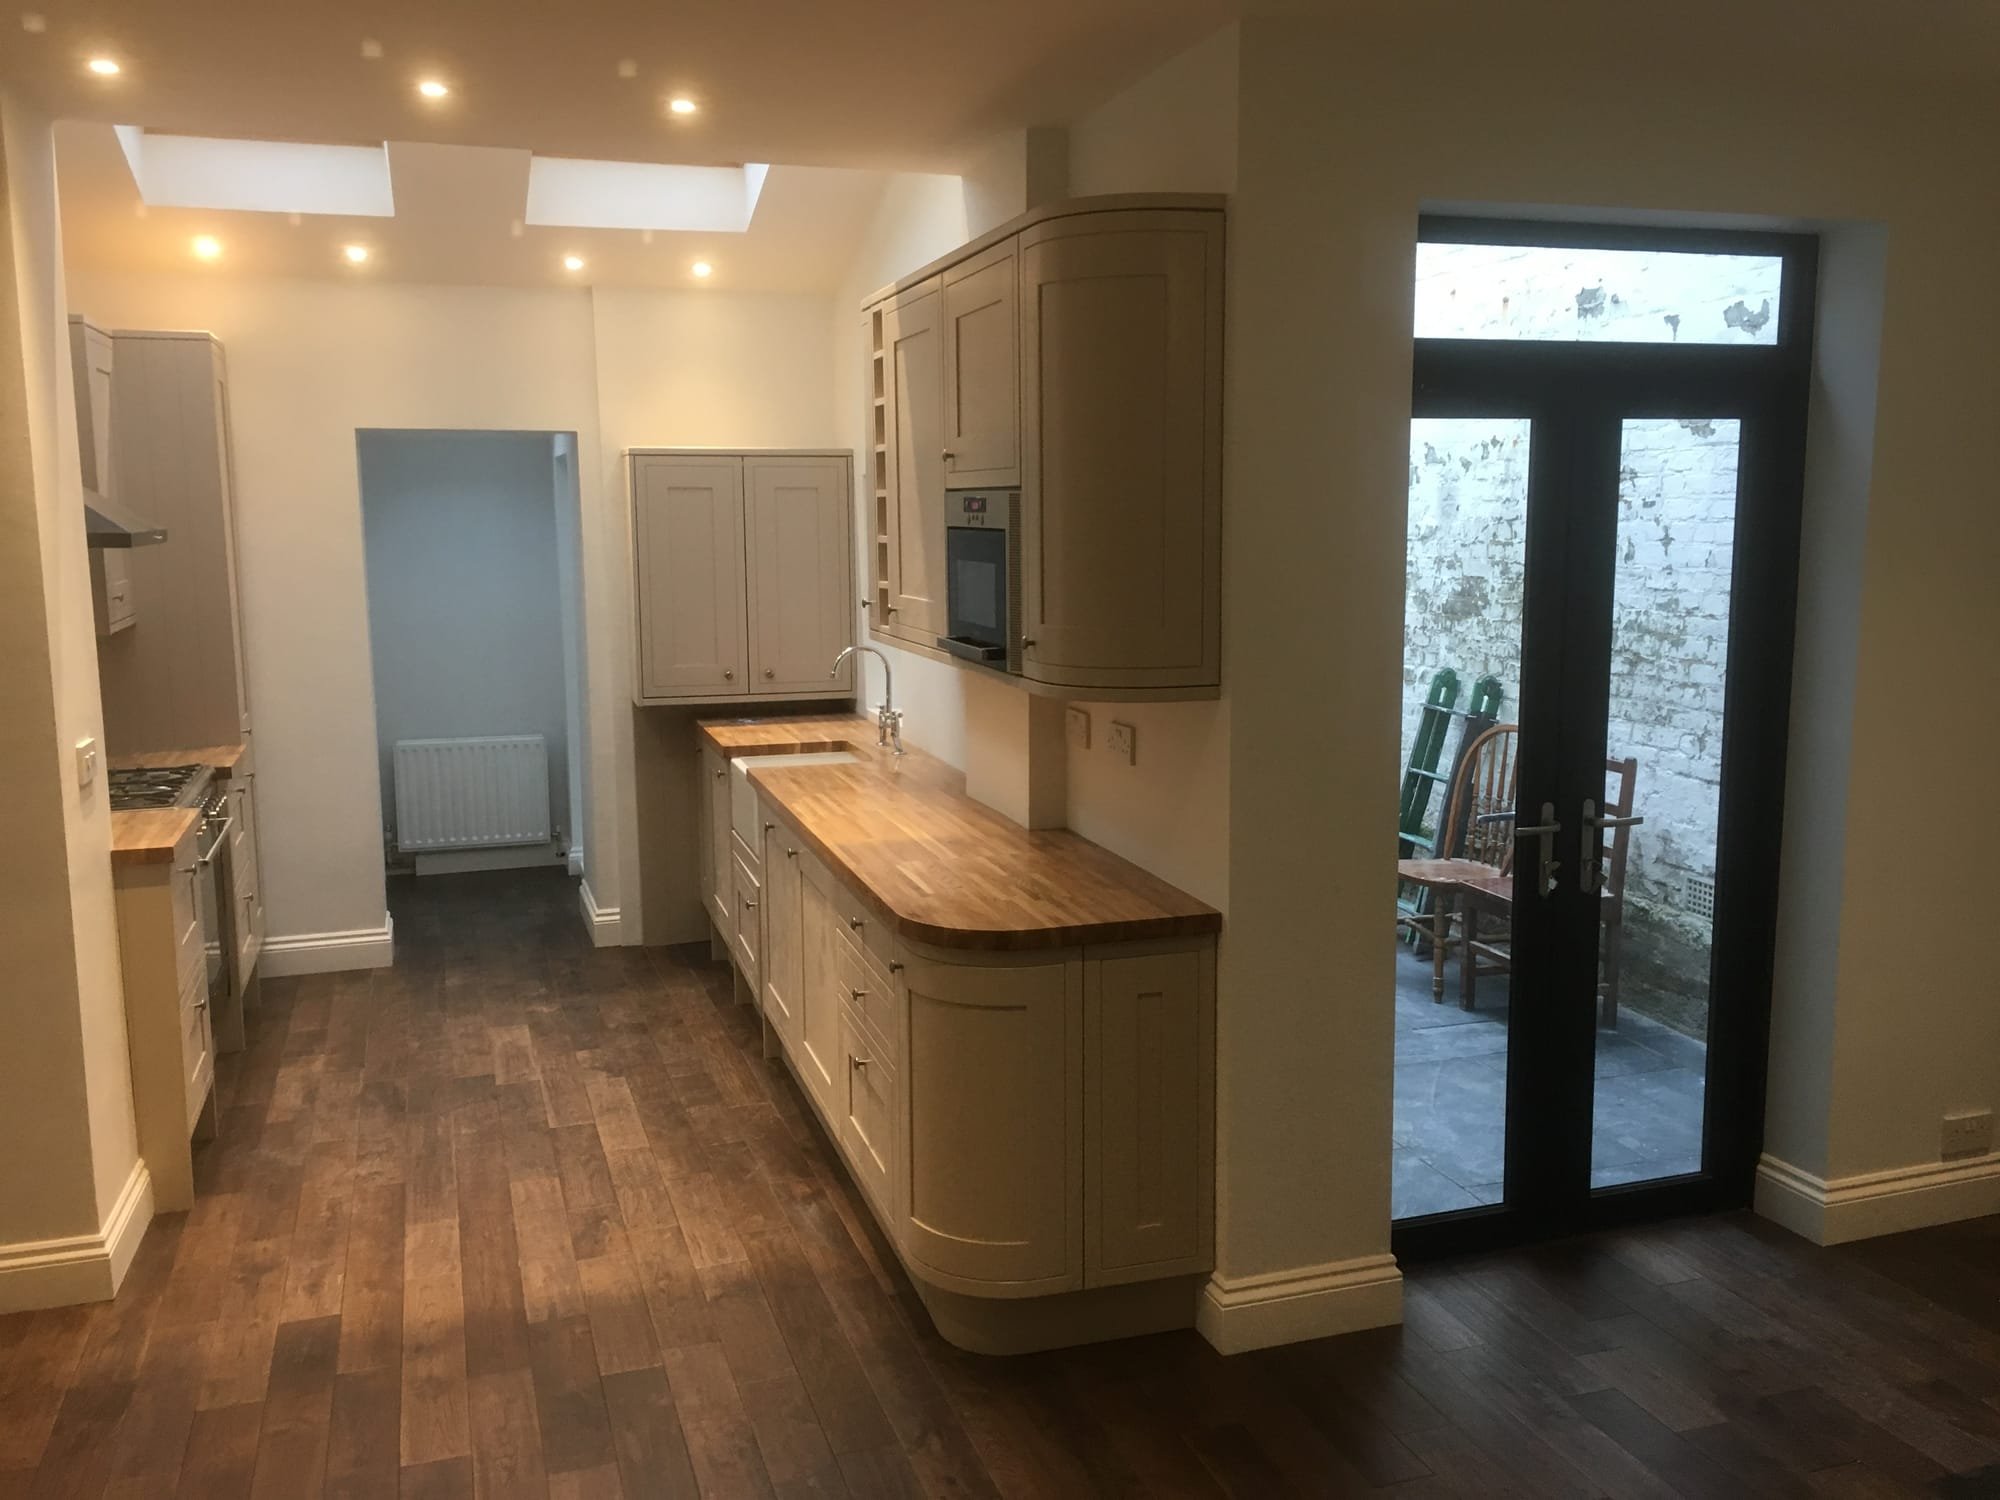 Rear kitchen extension and cloakroom with new French doors and new flooring throughout ground floor in Wandsworth, Balham, SW12